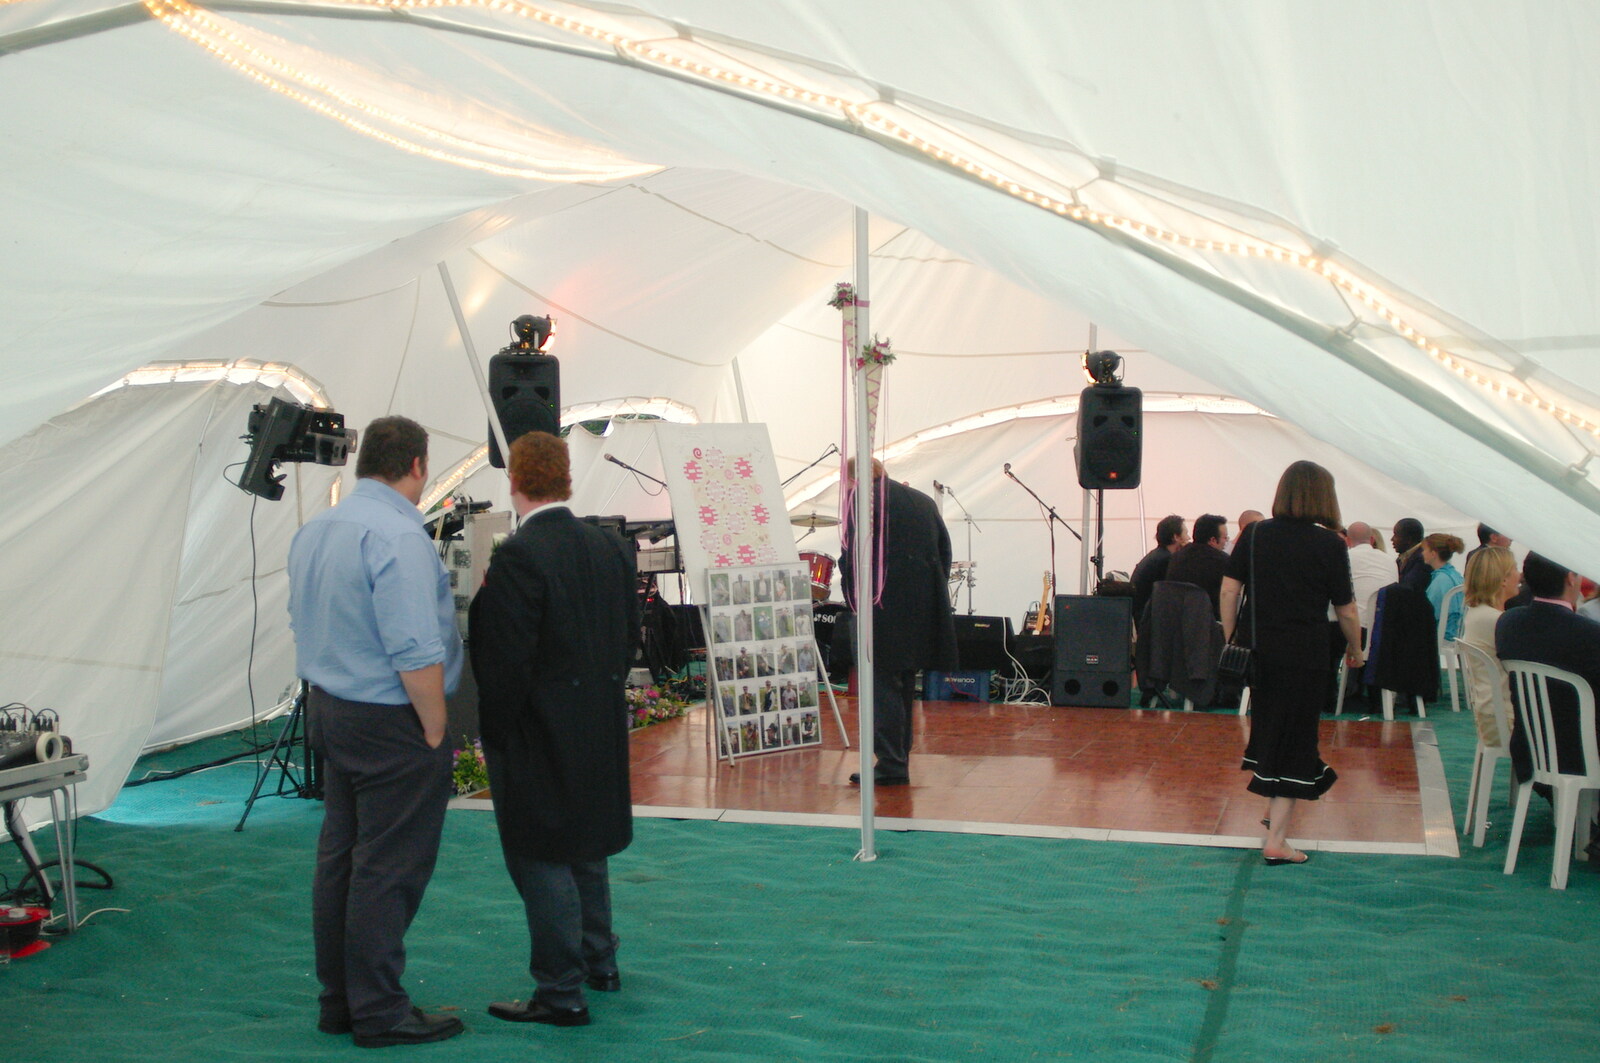 The band is set in the corner of the marquee from The BBs do a Wedding Gig at Syleham, Suffolk - 25th June 2005